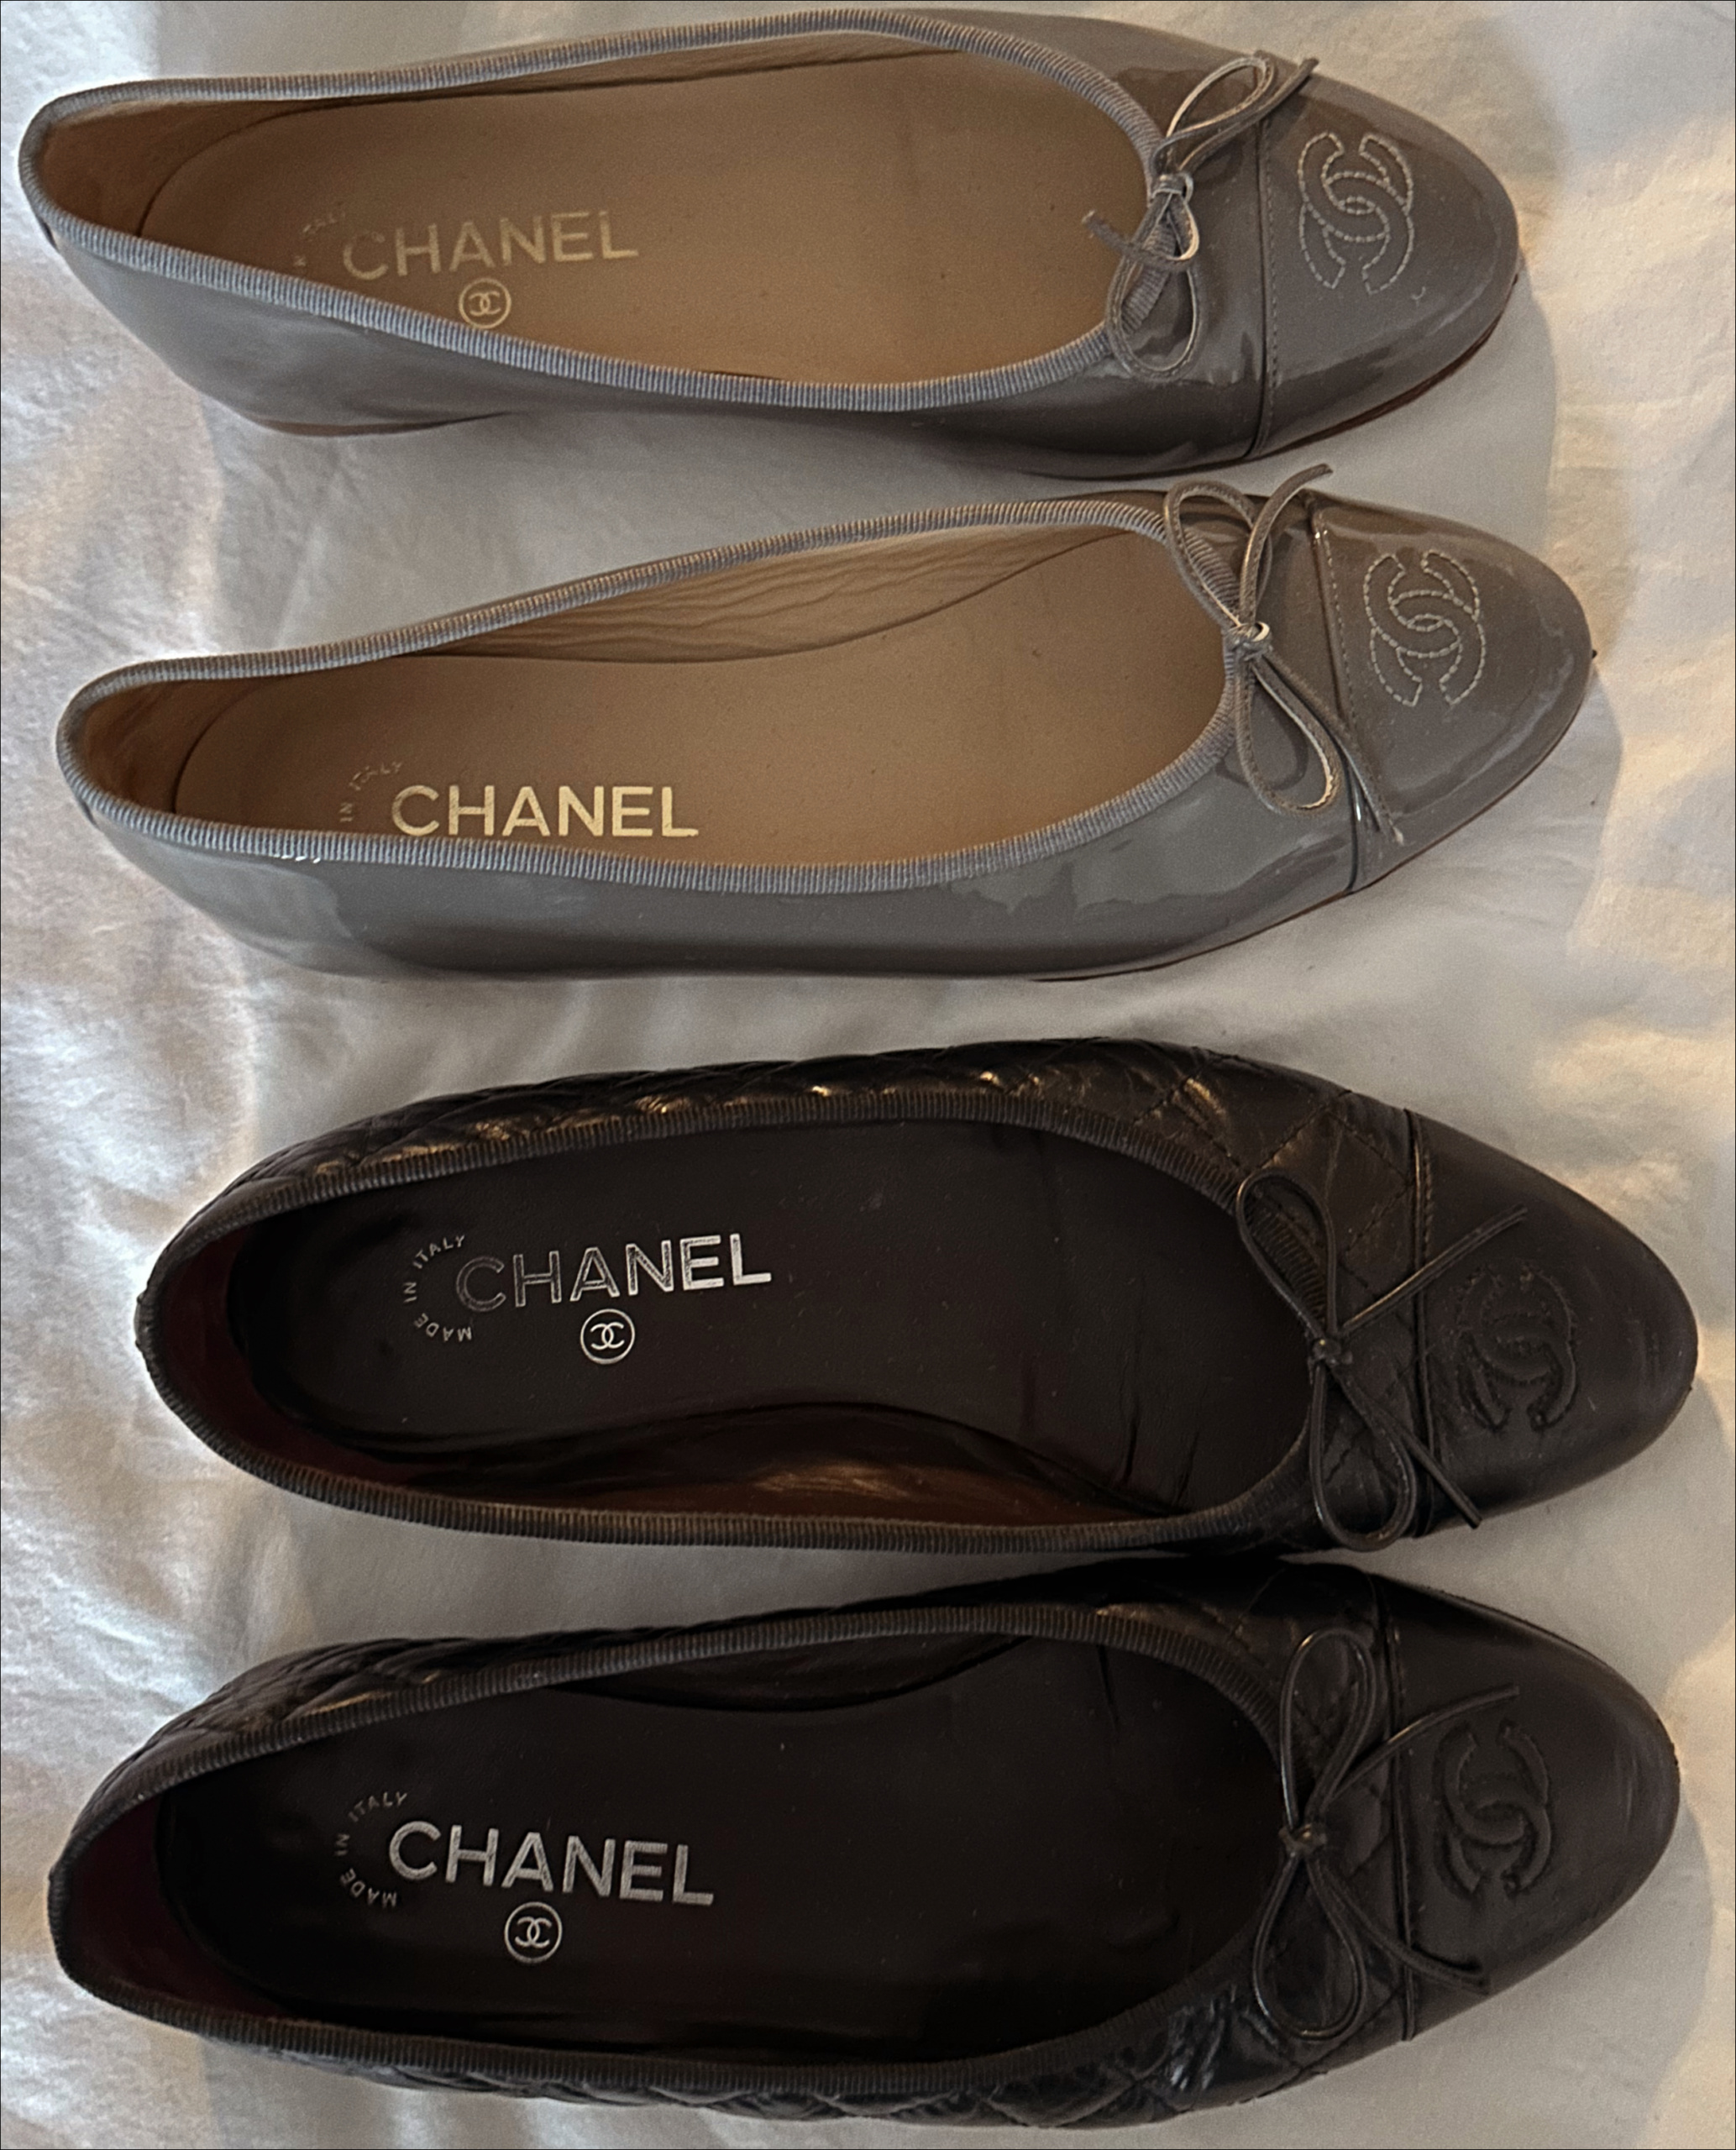 Chanel Flats Sizing Buying Guide | Brooklyn Blonde